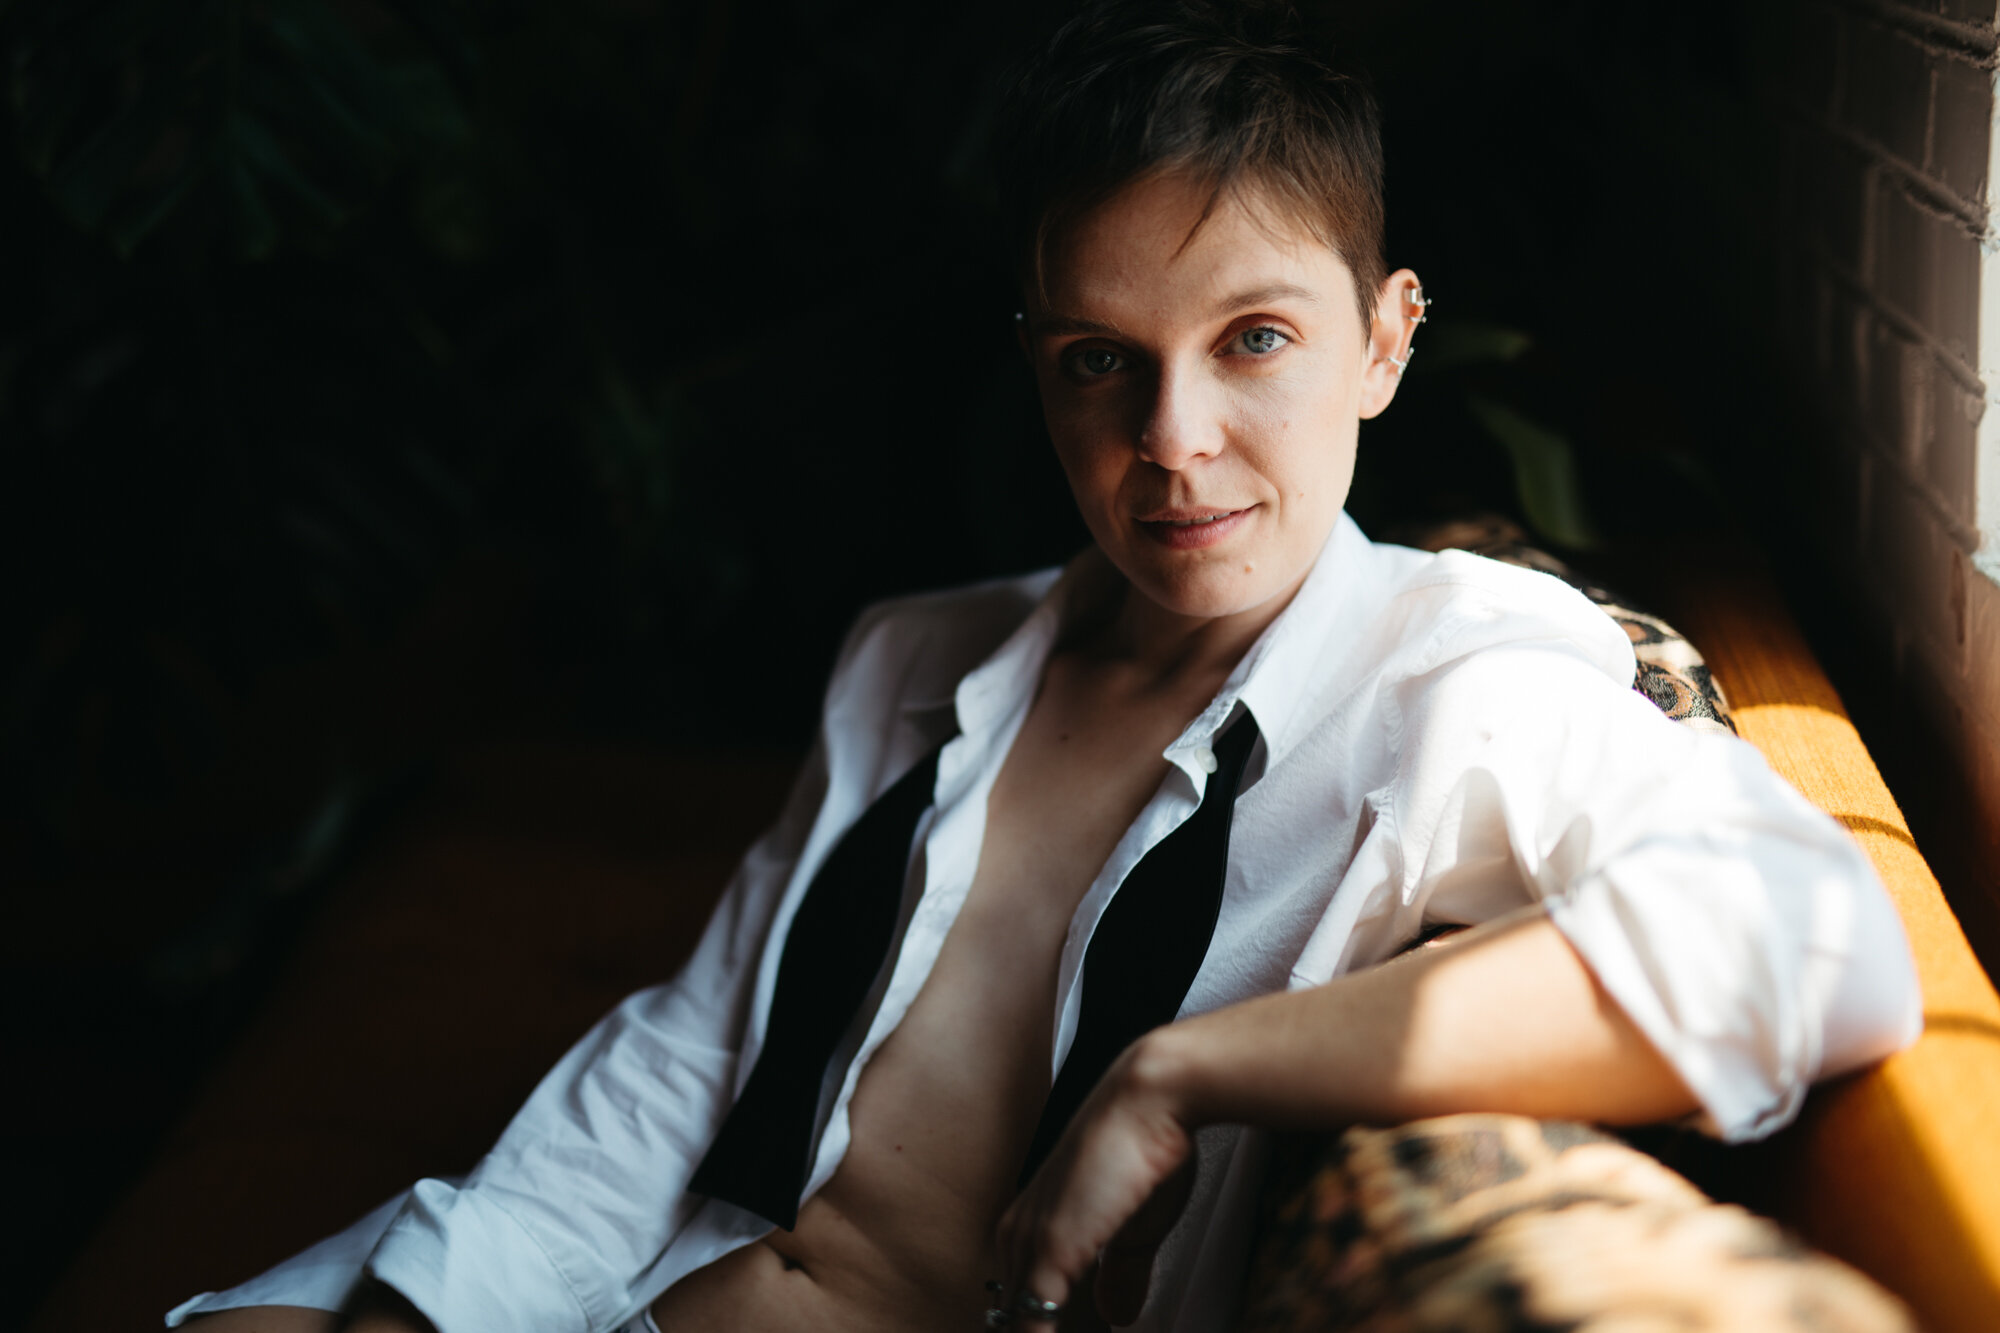 Queer person in masculine attire with shirt unbuttoned sitting by window